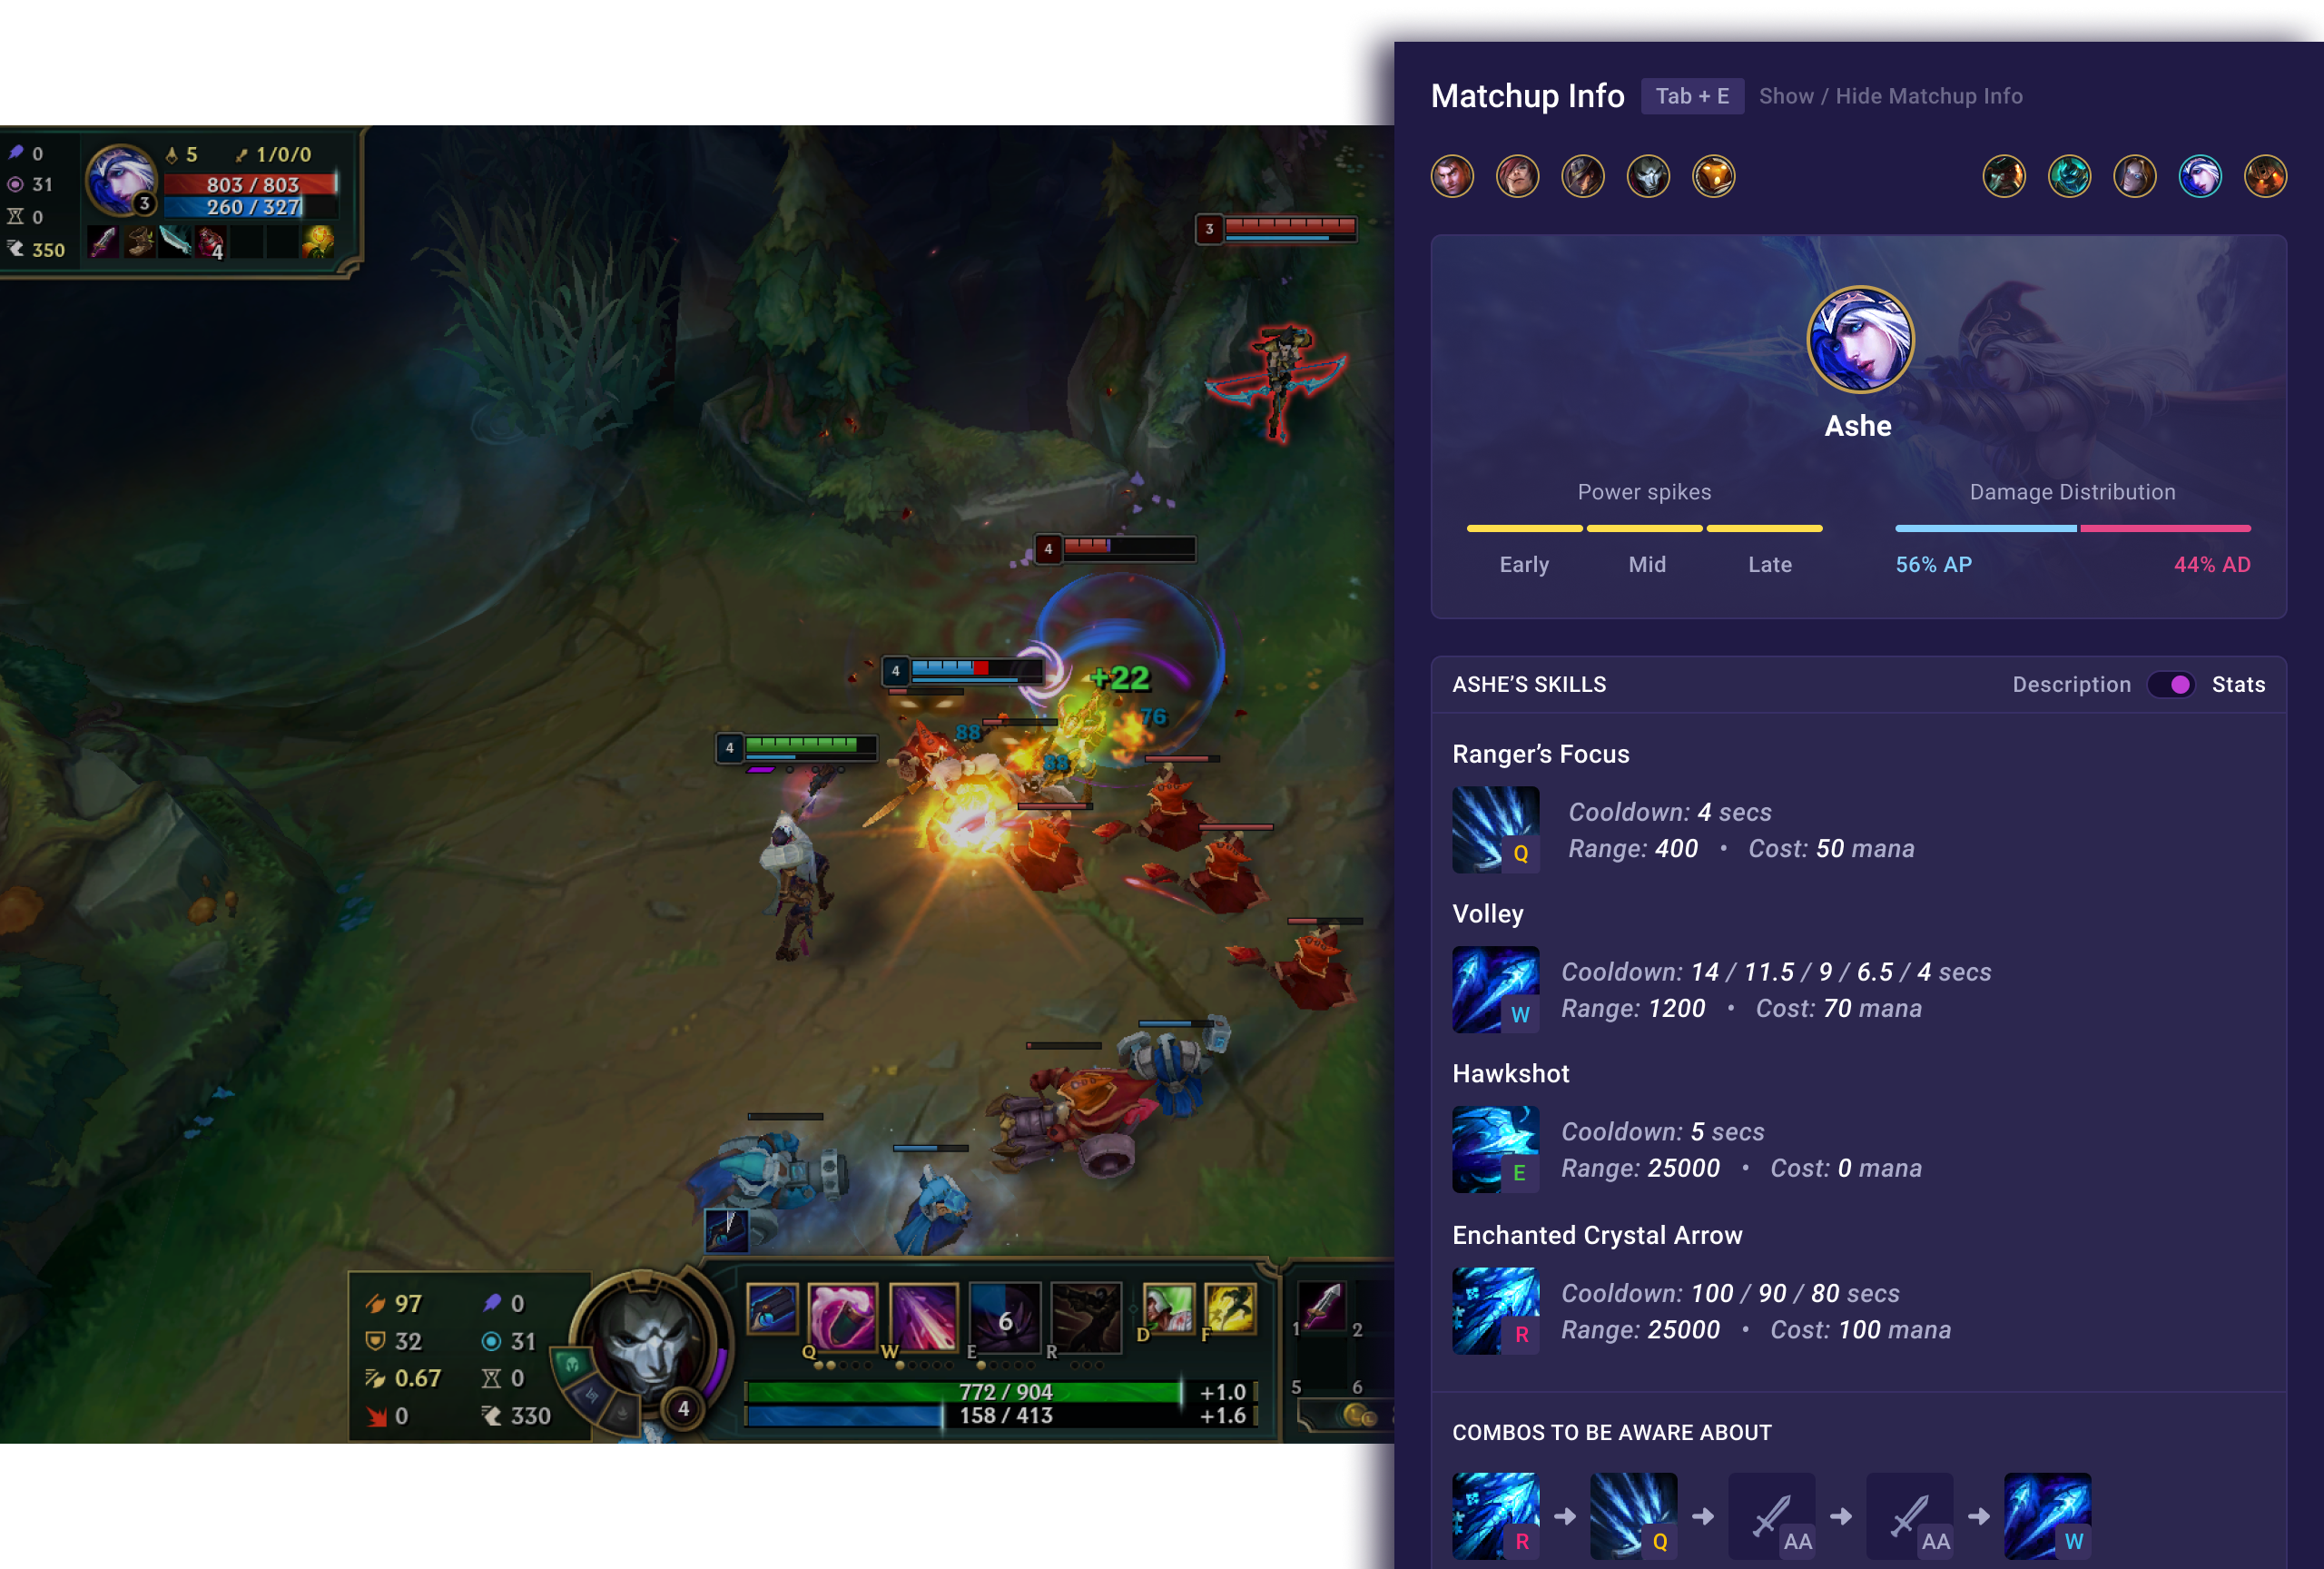 league of legends in game overlay